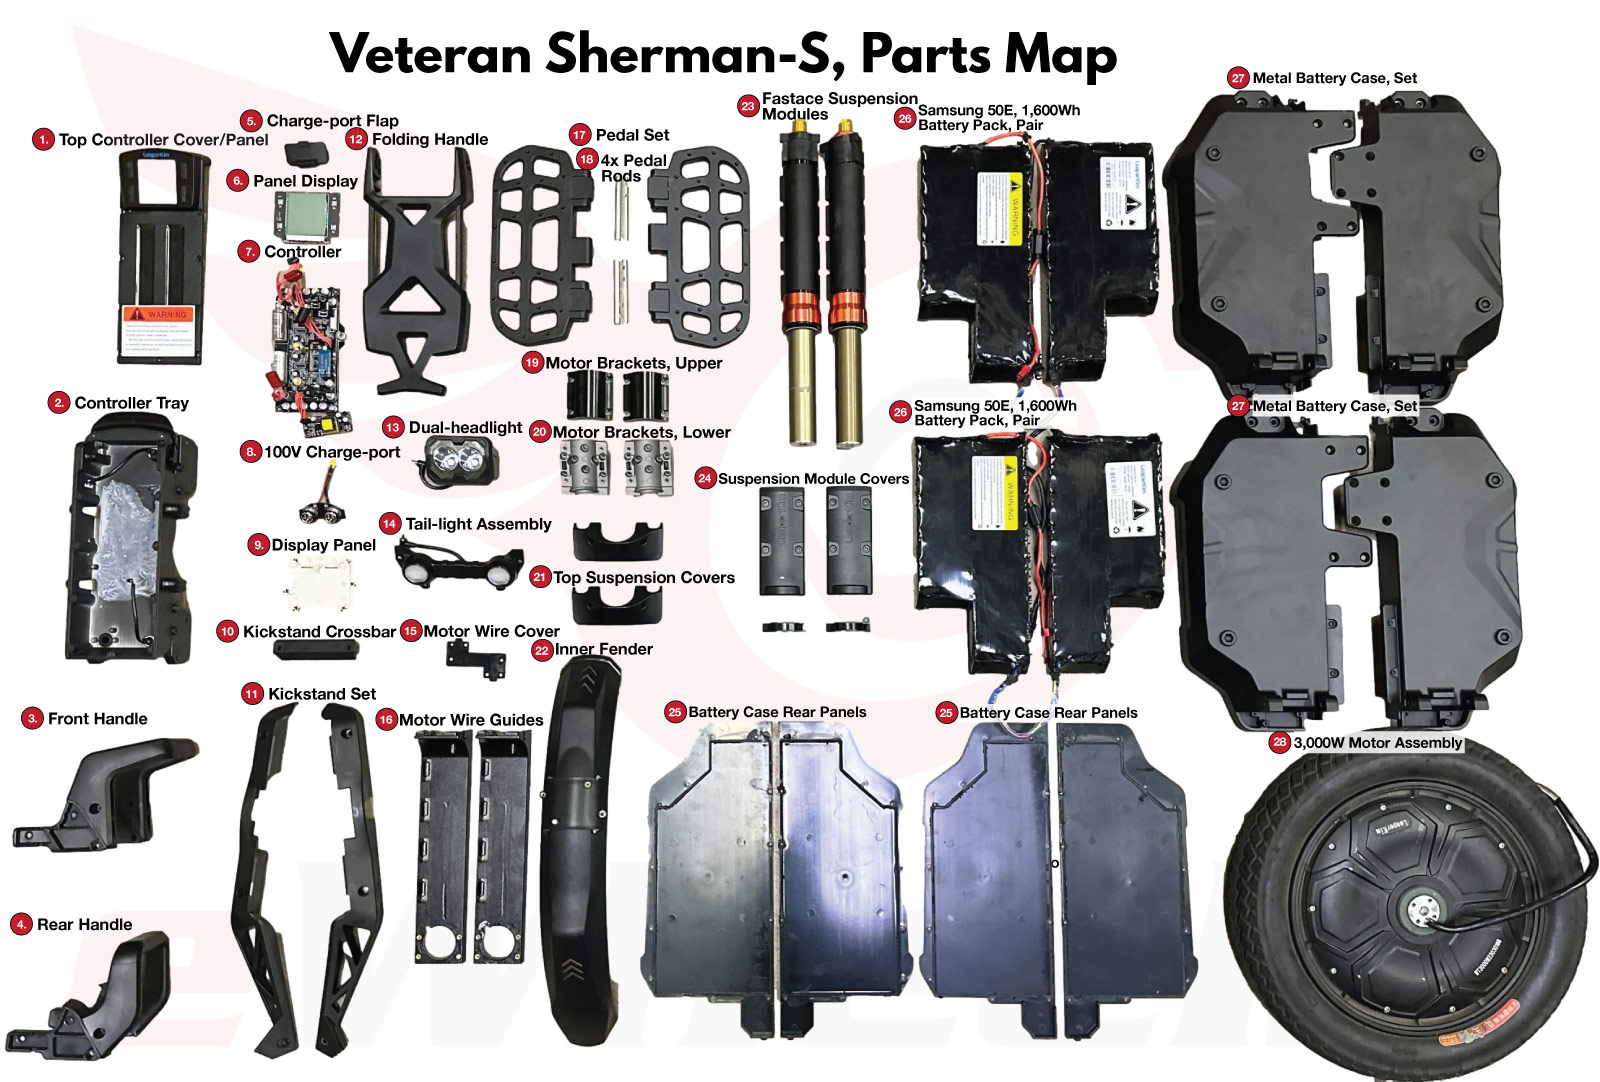 Leaperkim Veteran Sherman-S Parts Map Overview